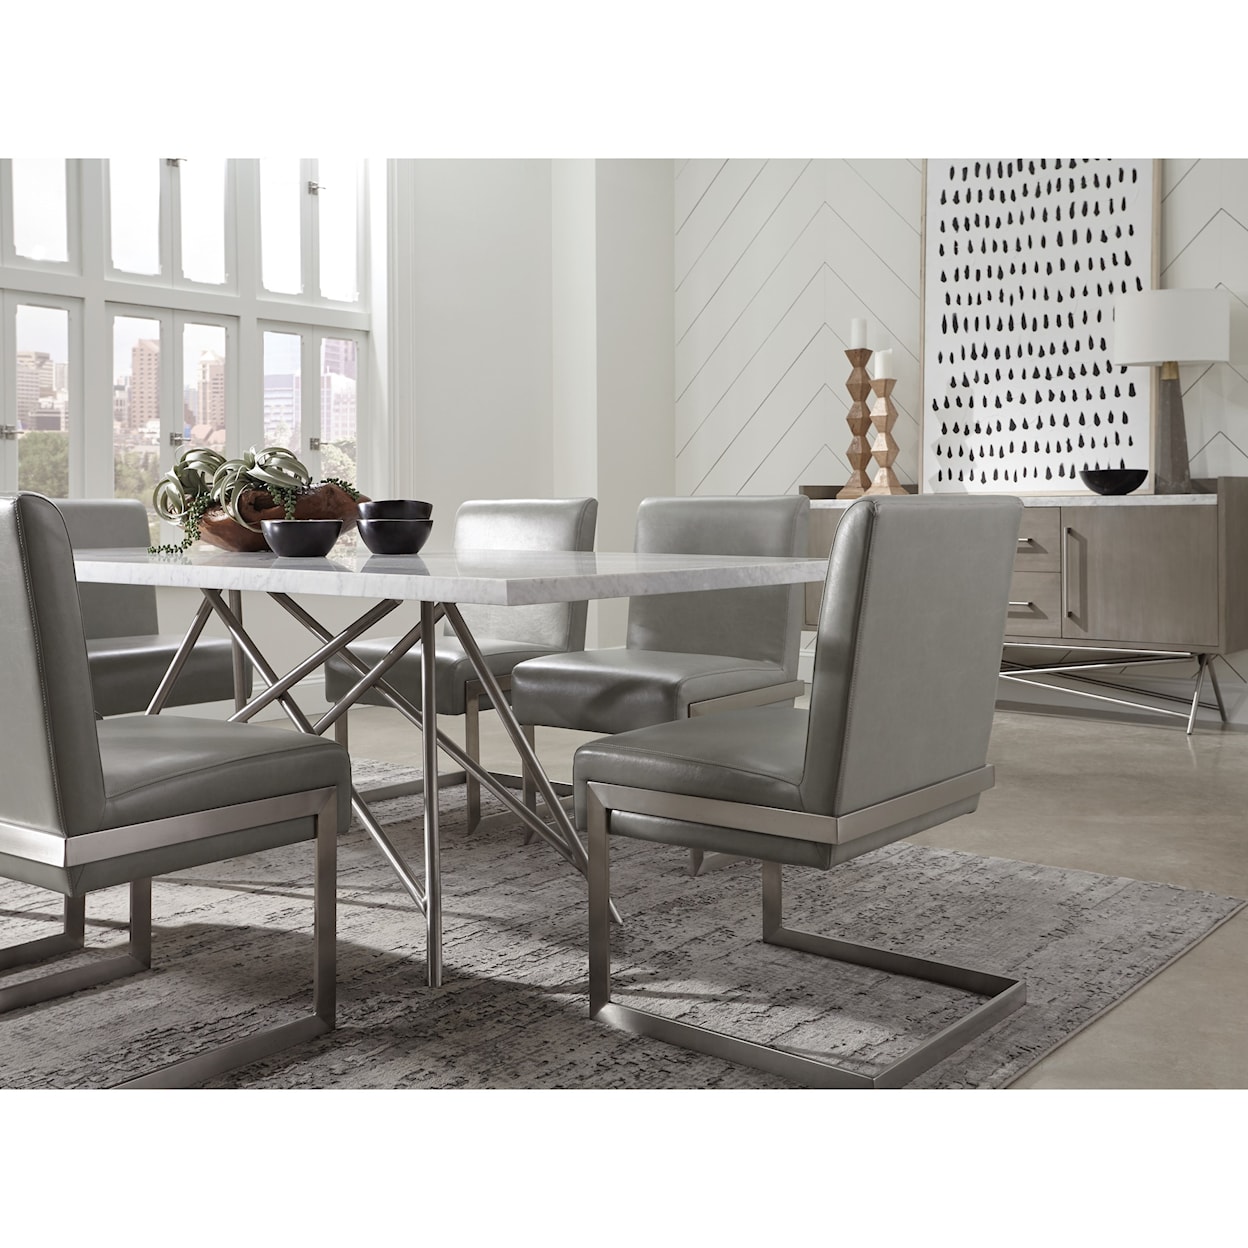 Modus International Coral Dining Room Group